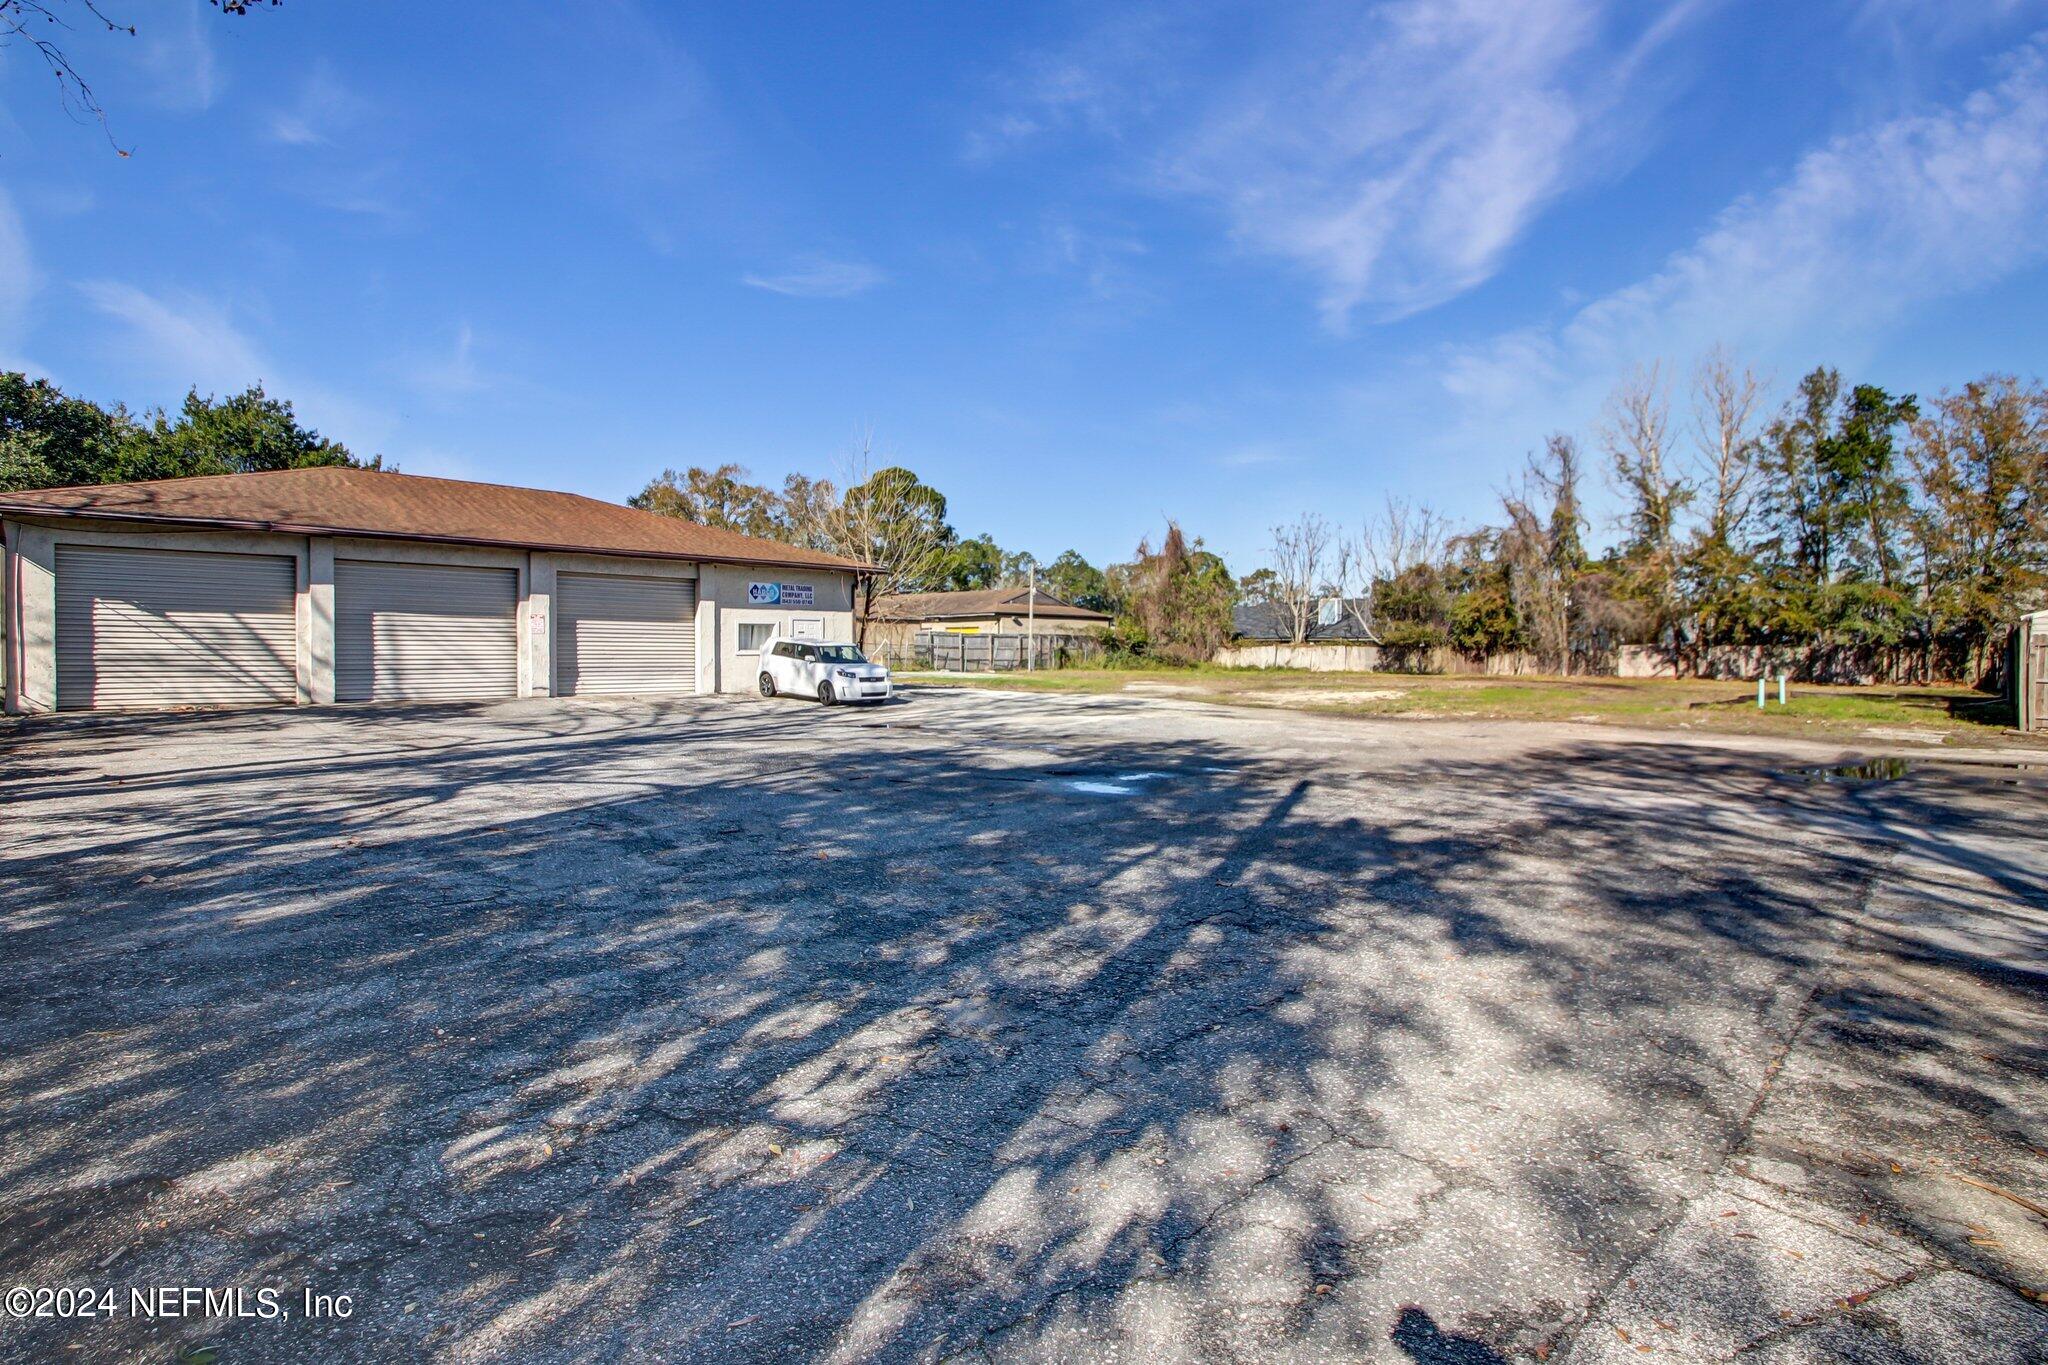 5236 RICKER Road 1, Jacksonville, Florida, 32210, United States, ,Residential,For Sale,5236 RICKER Road 1,1476813